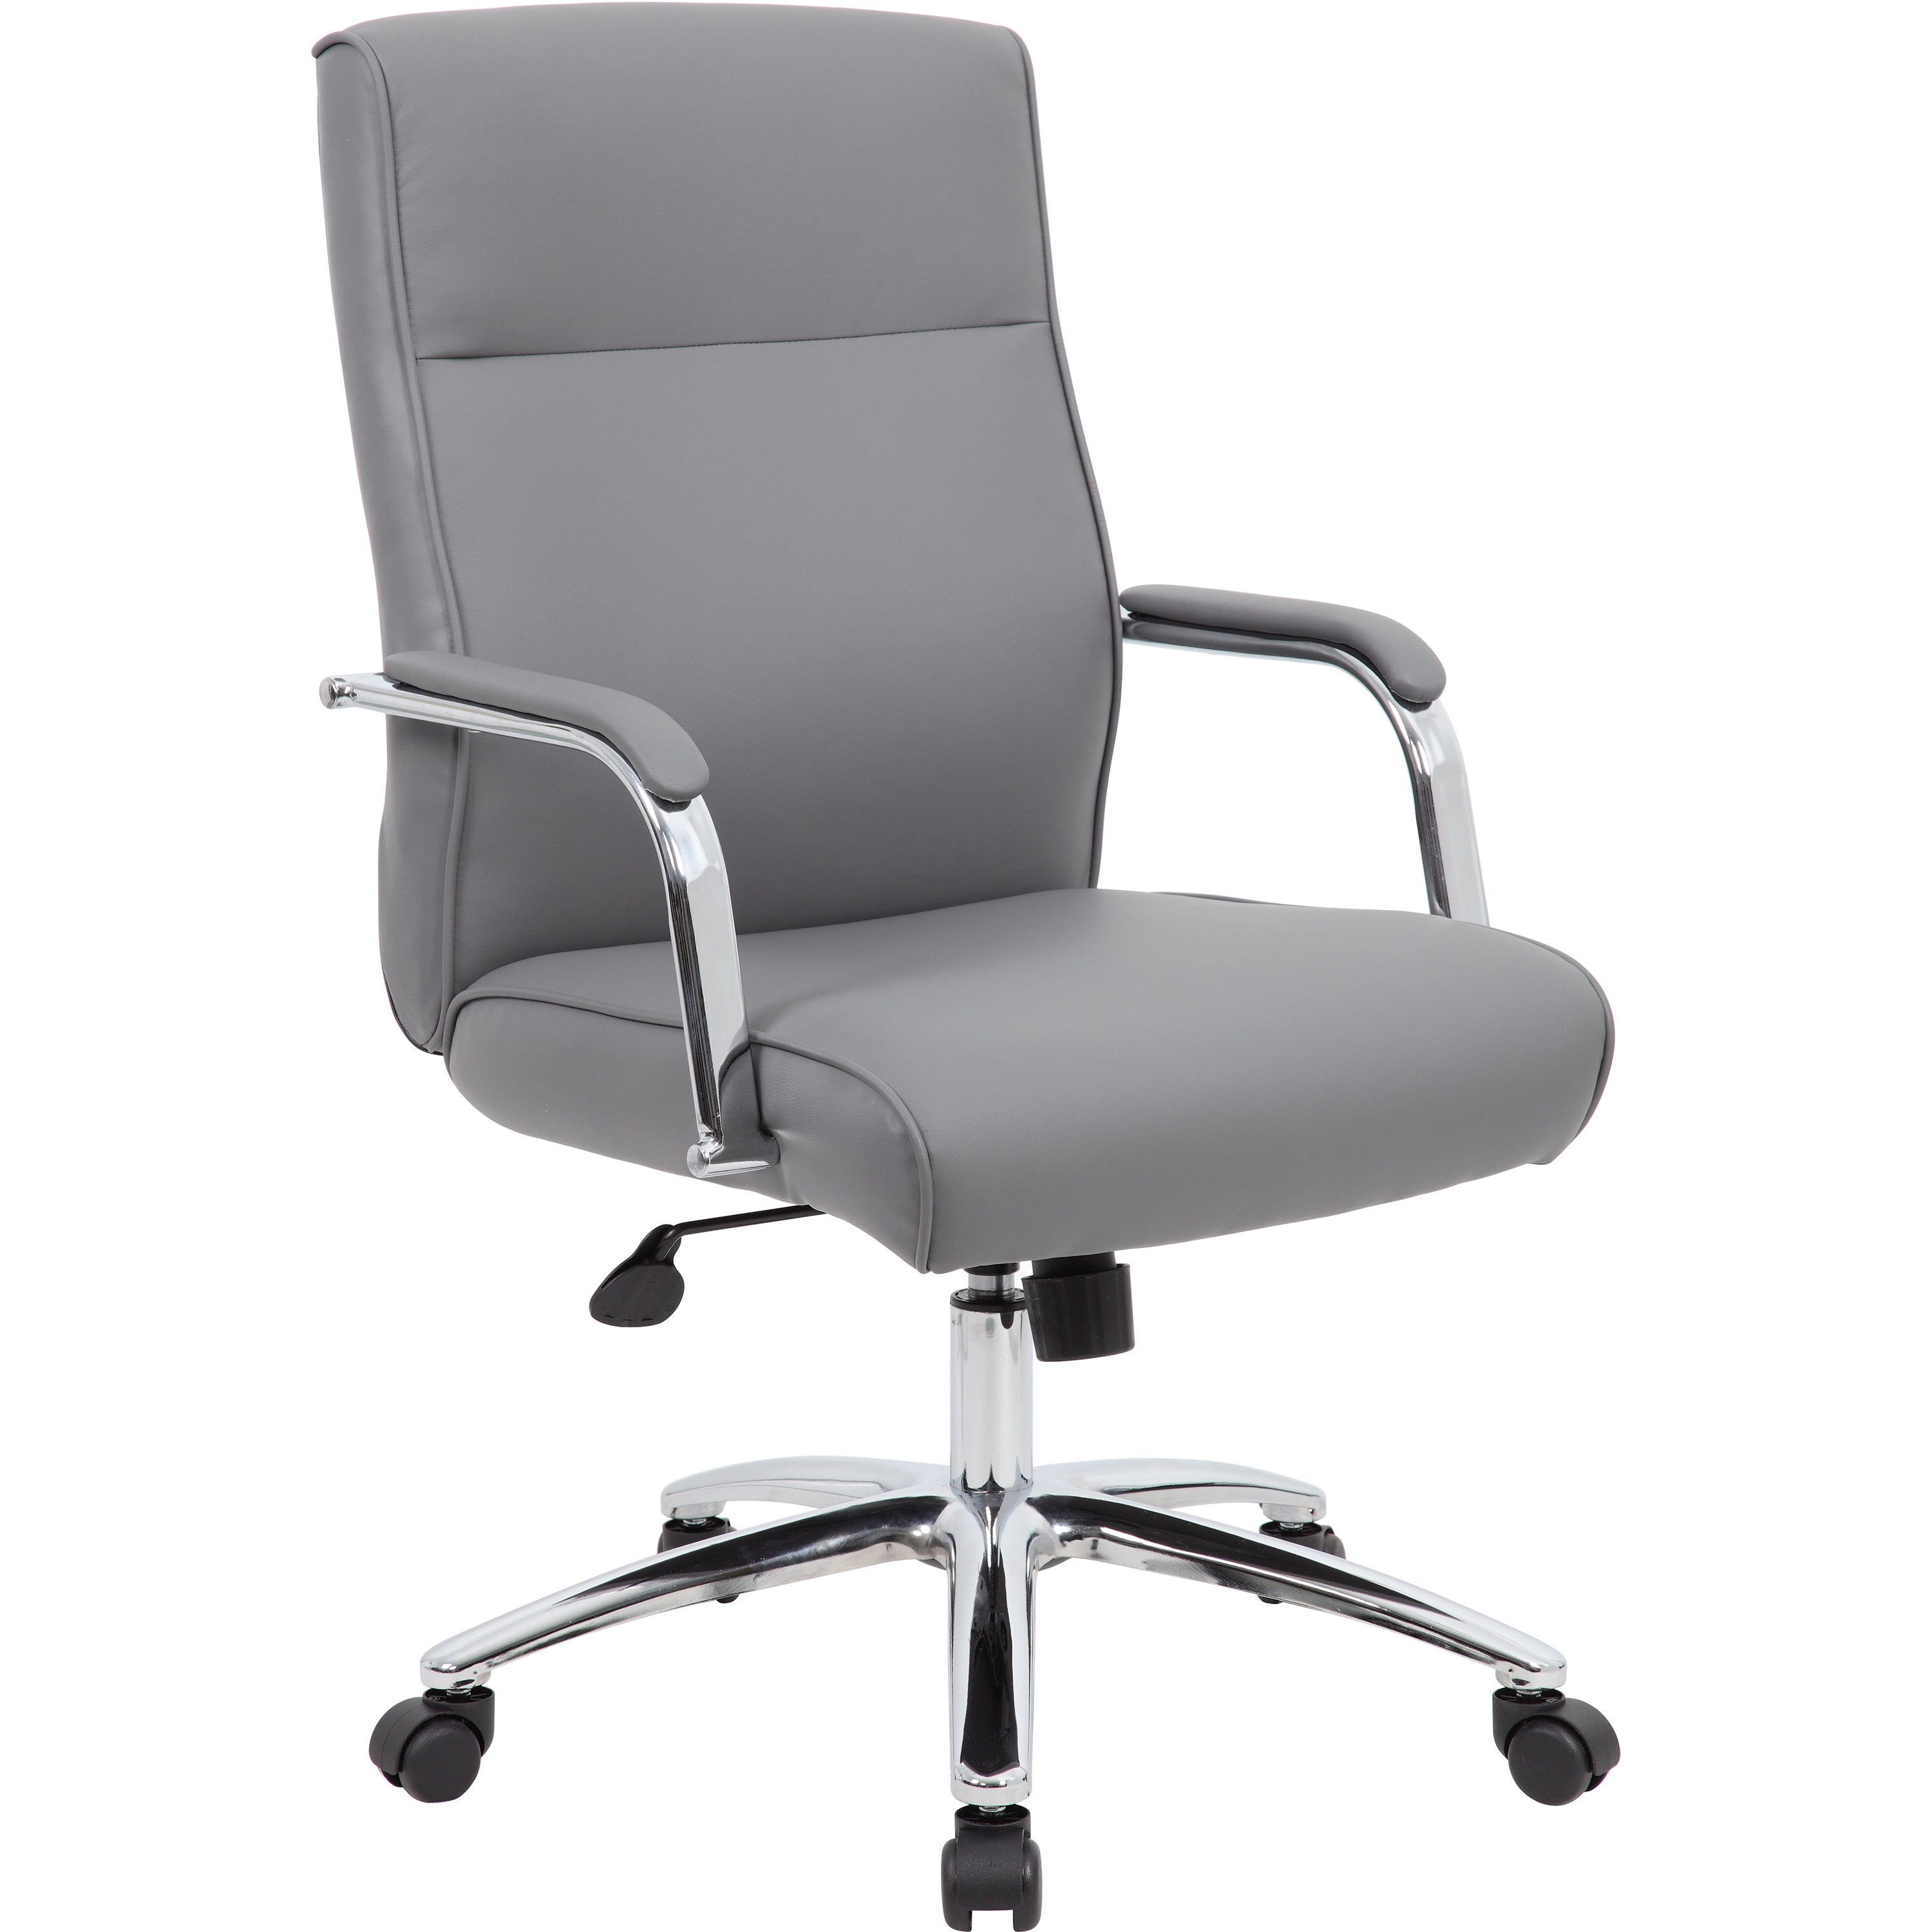 Modern Executive Conference Chair - Grey, B696C-GY